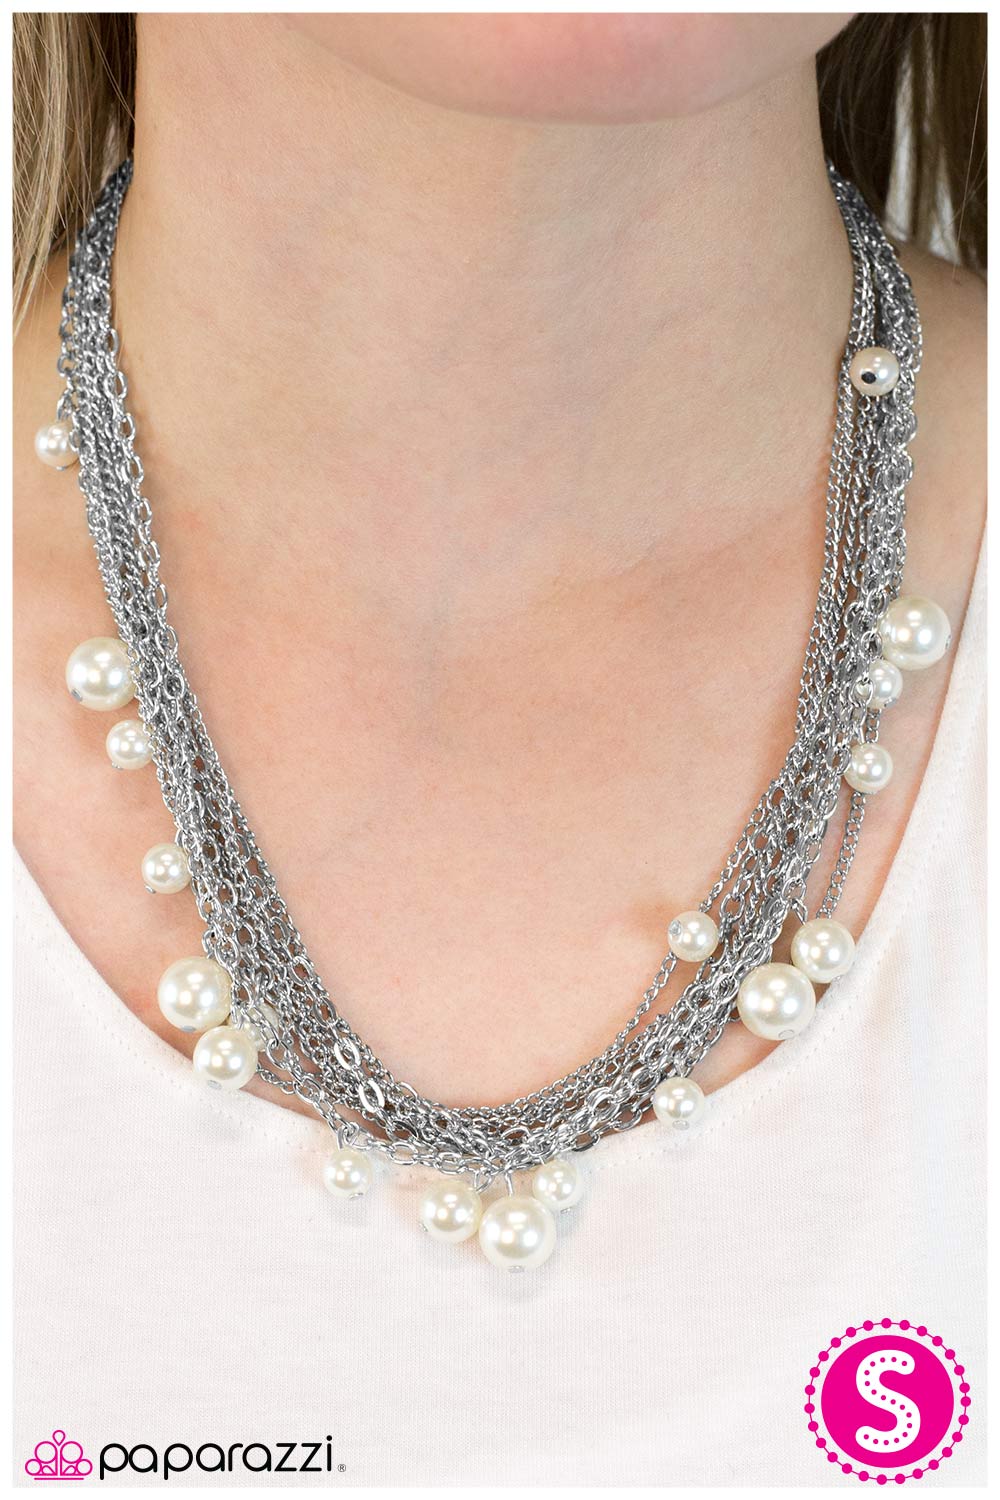 Paparazzi Necklace ~ The First Lady  - White